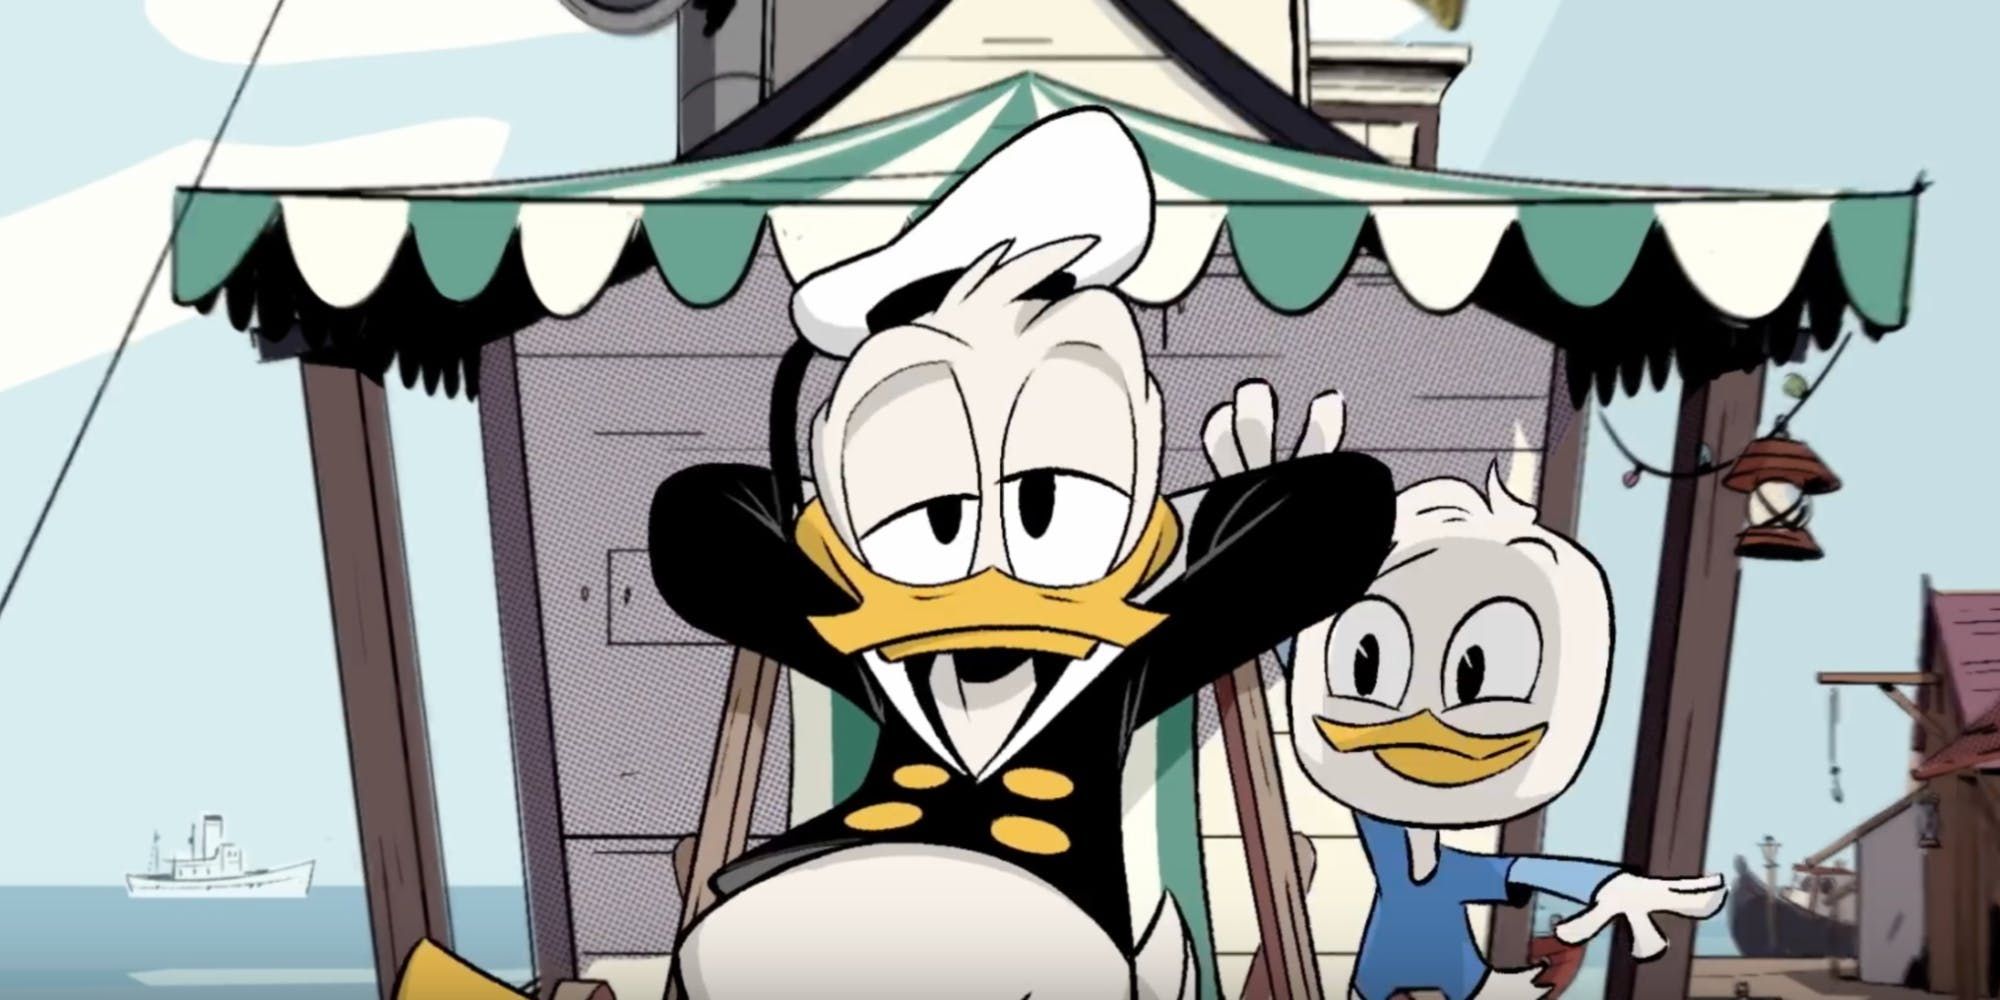 Donald relaxes on his boat in Ducktales